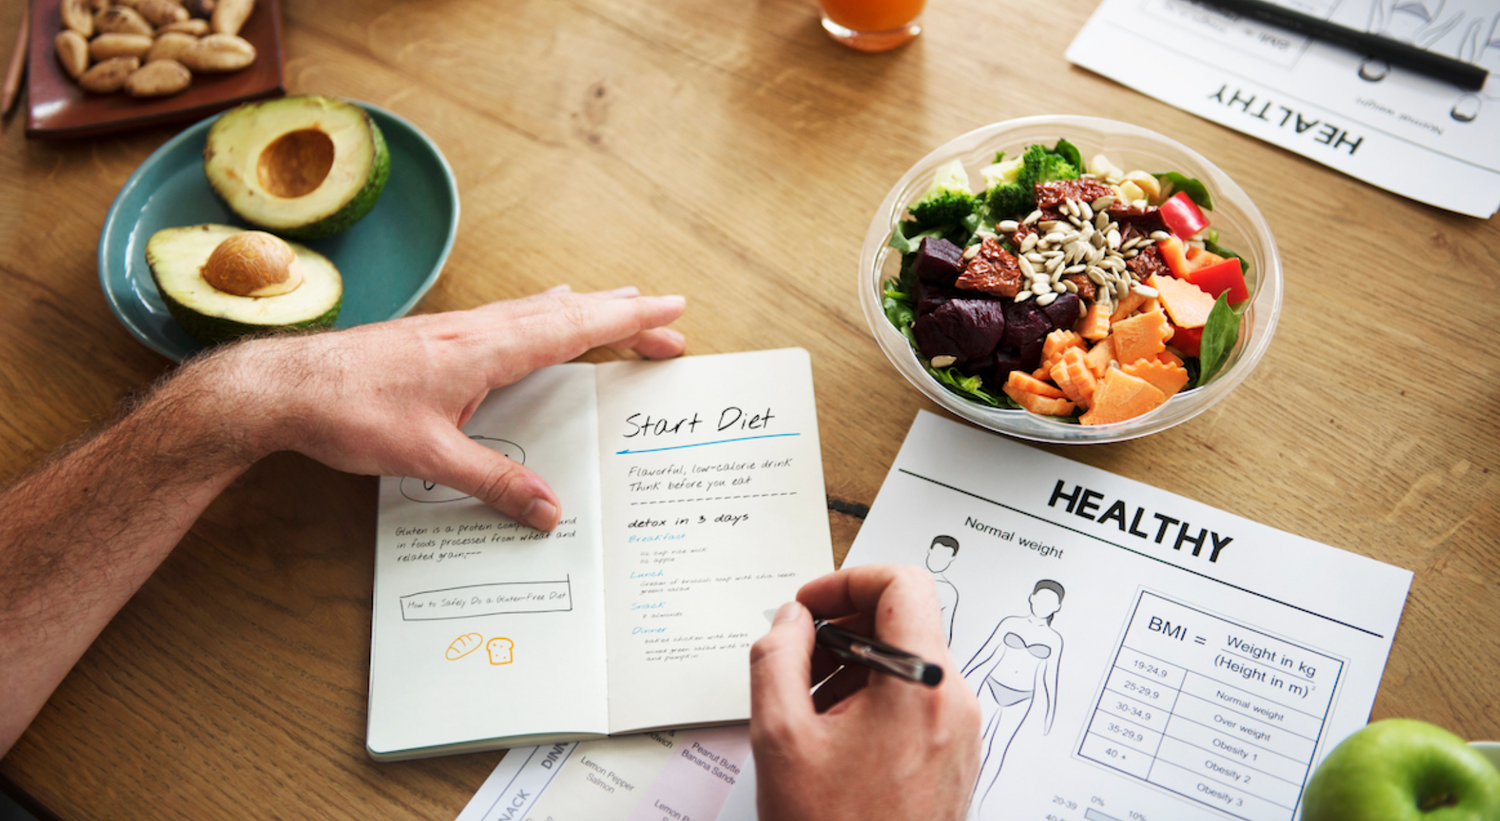 Take control of your health and lose the weight for good with Noom